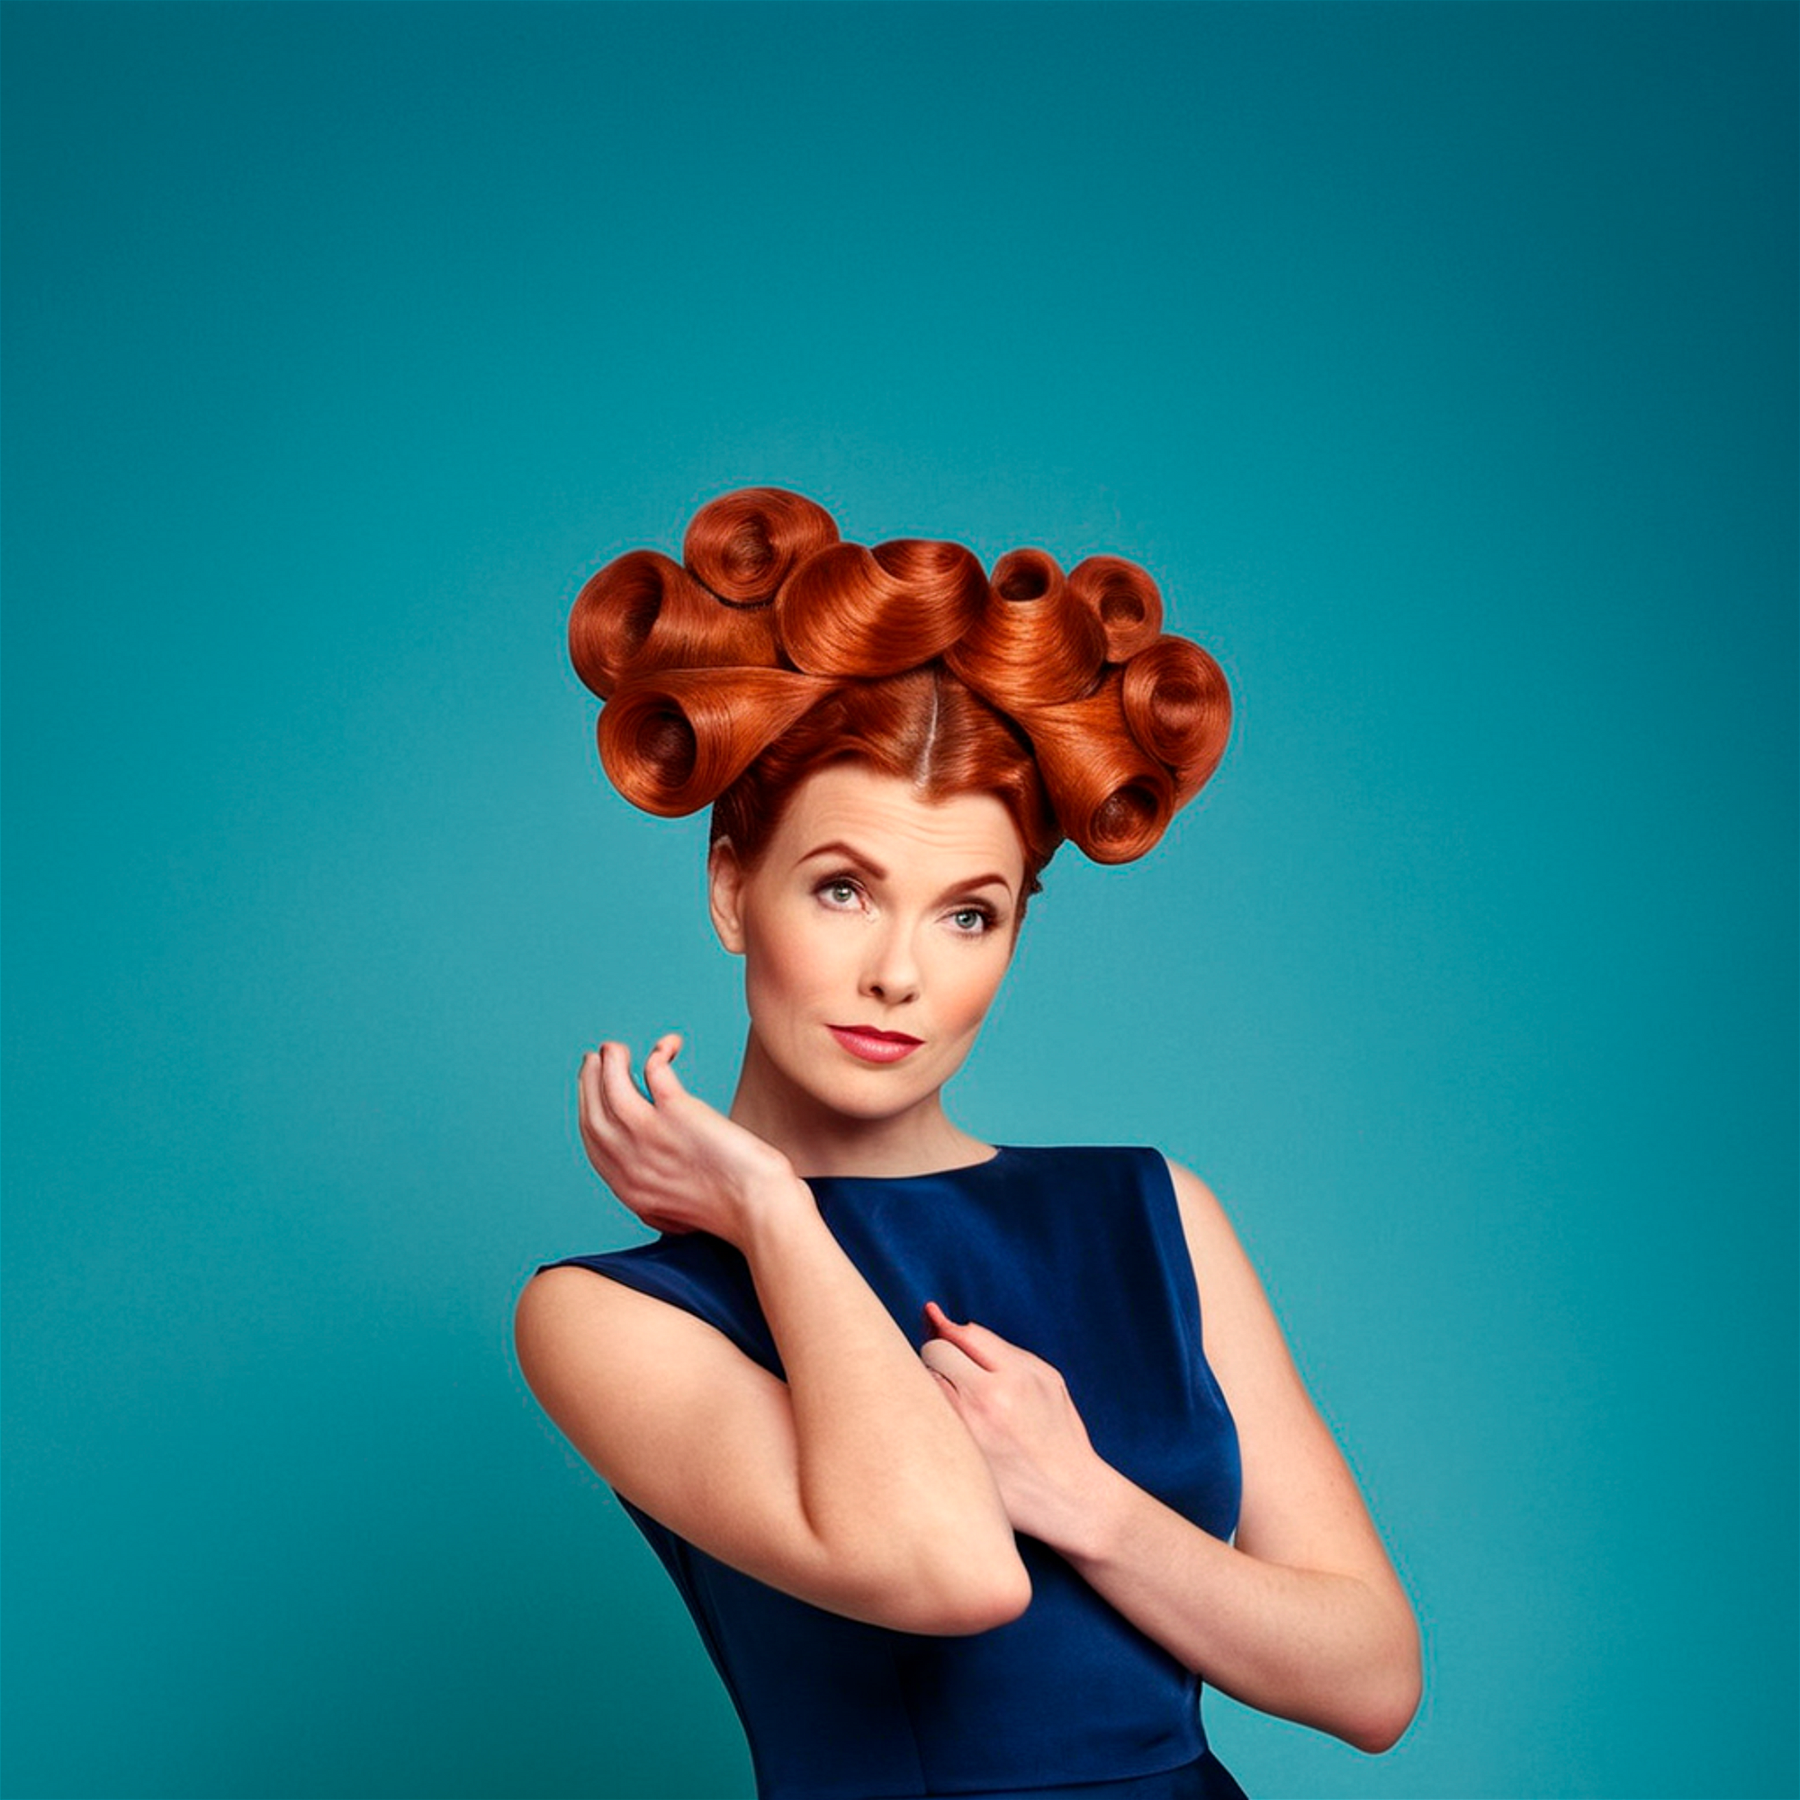 Crazy vintage hairstyle, redhead